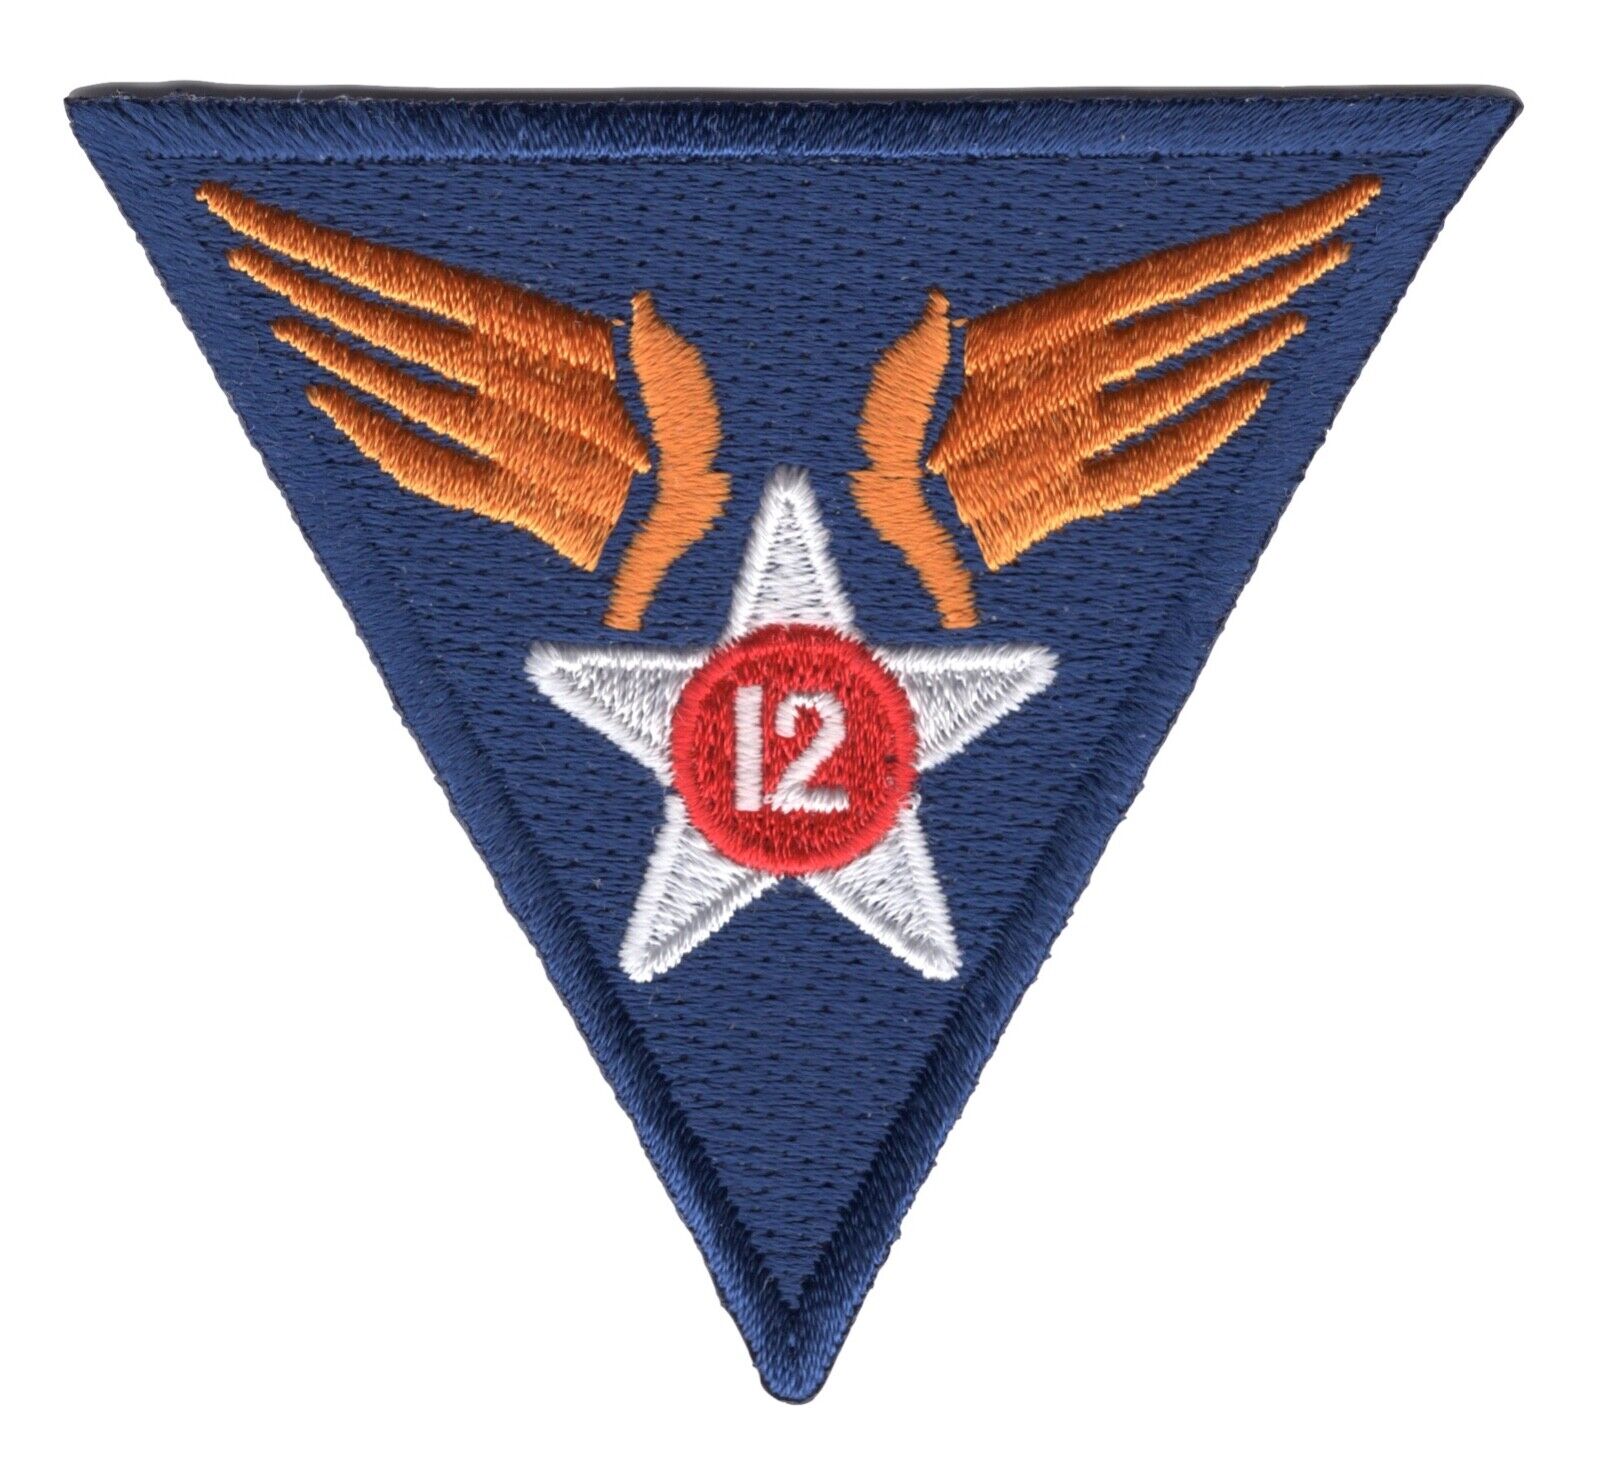 12th Air Force Shoulder Patch